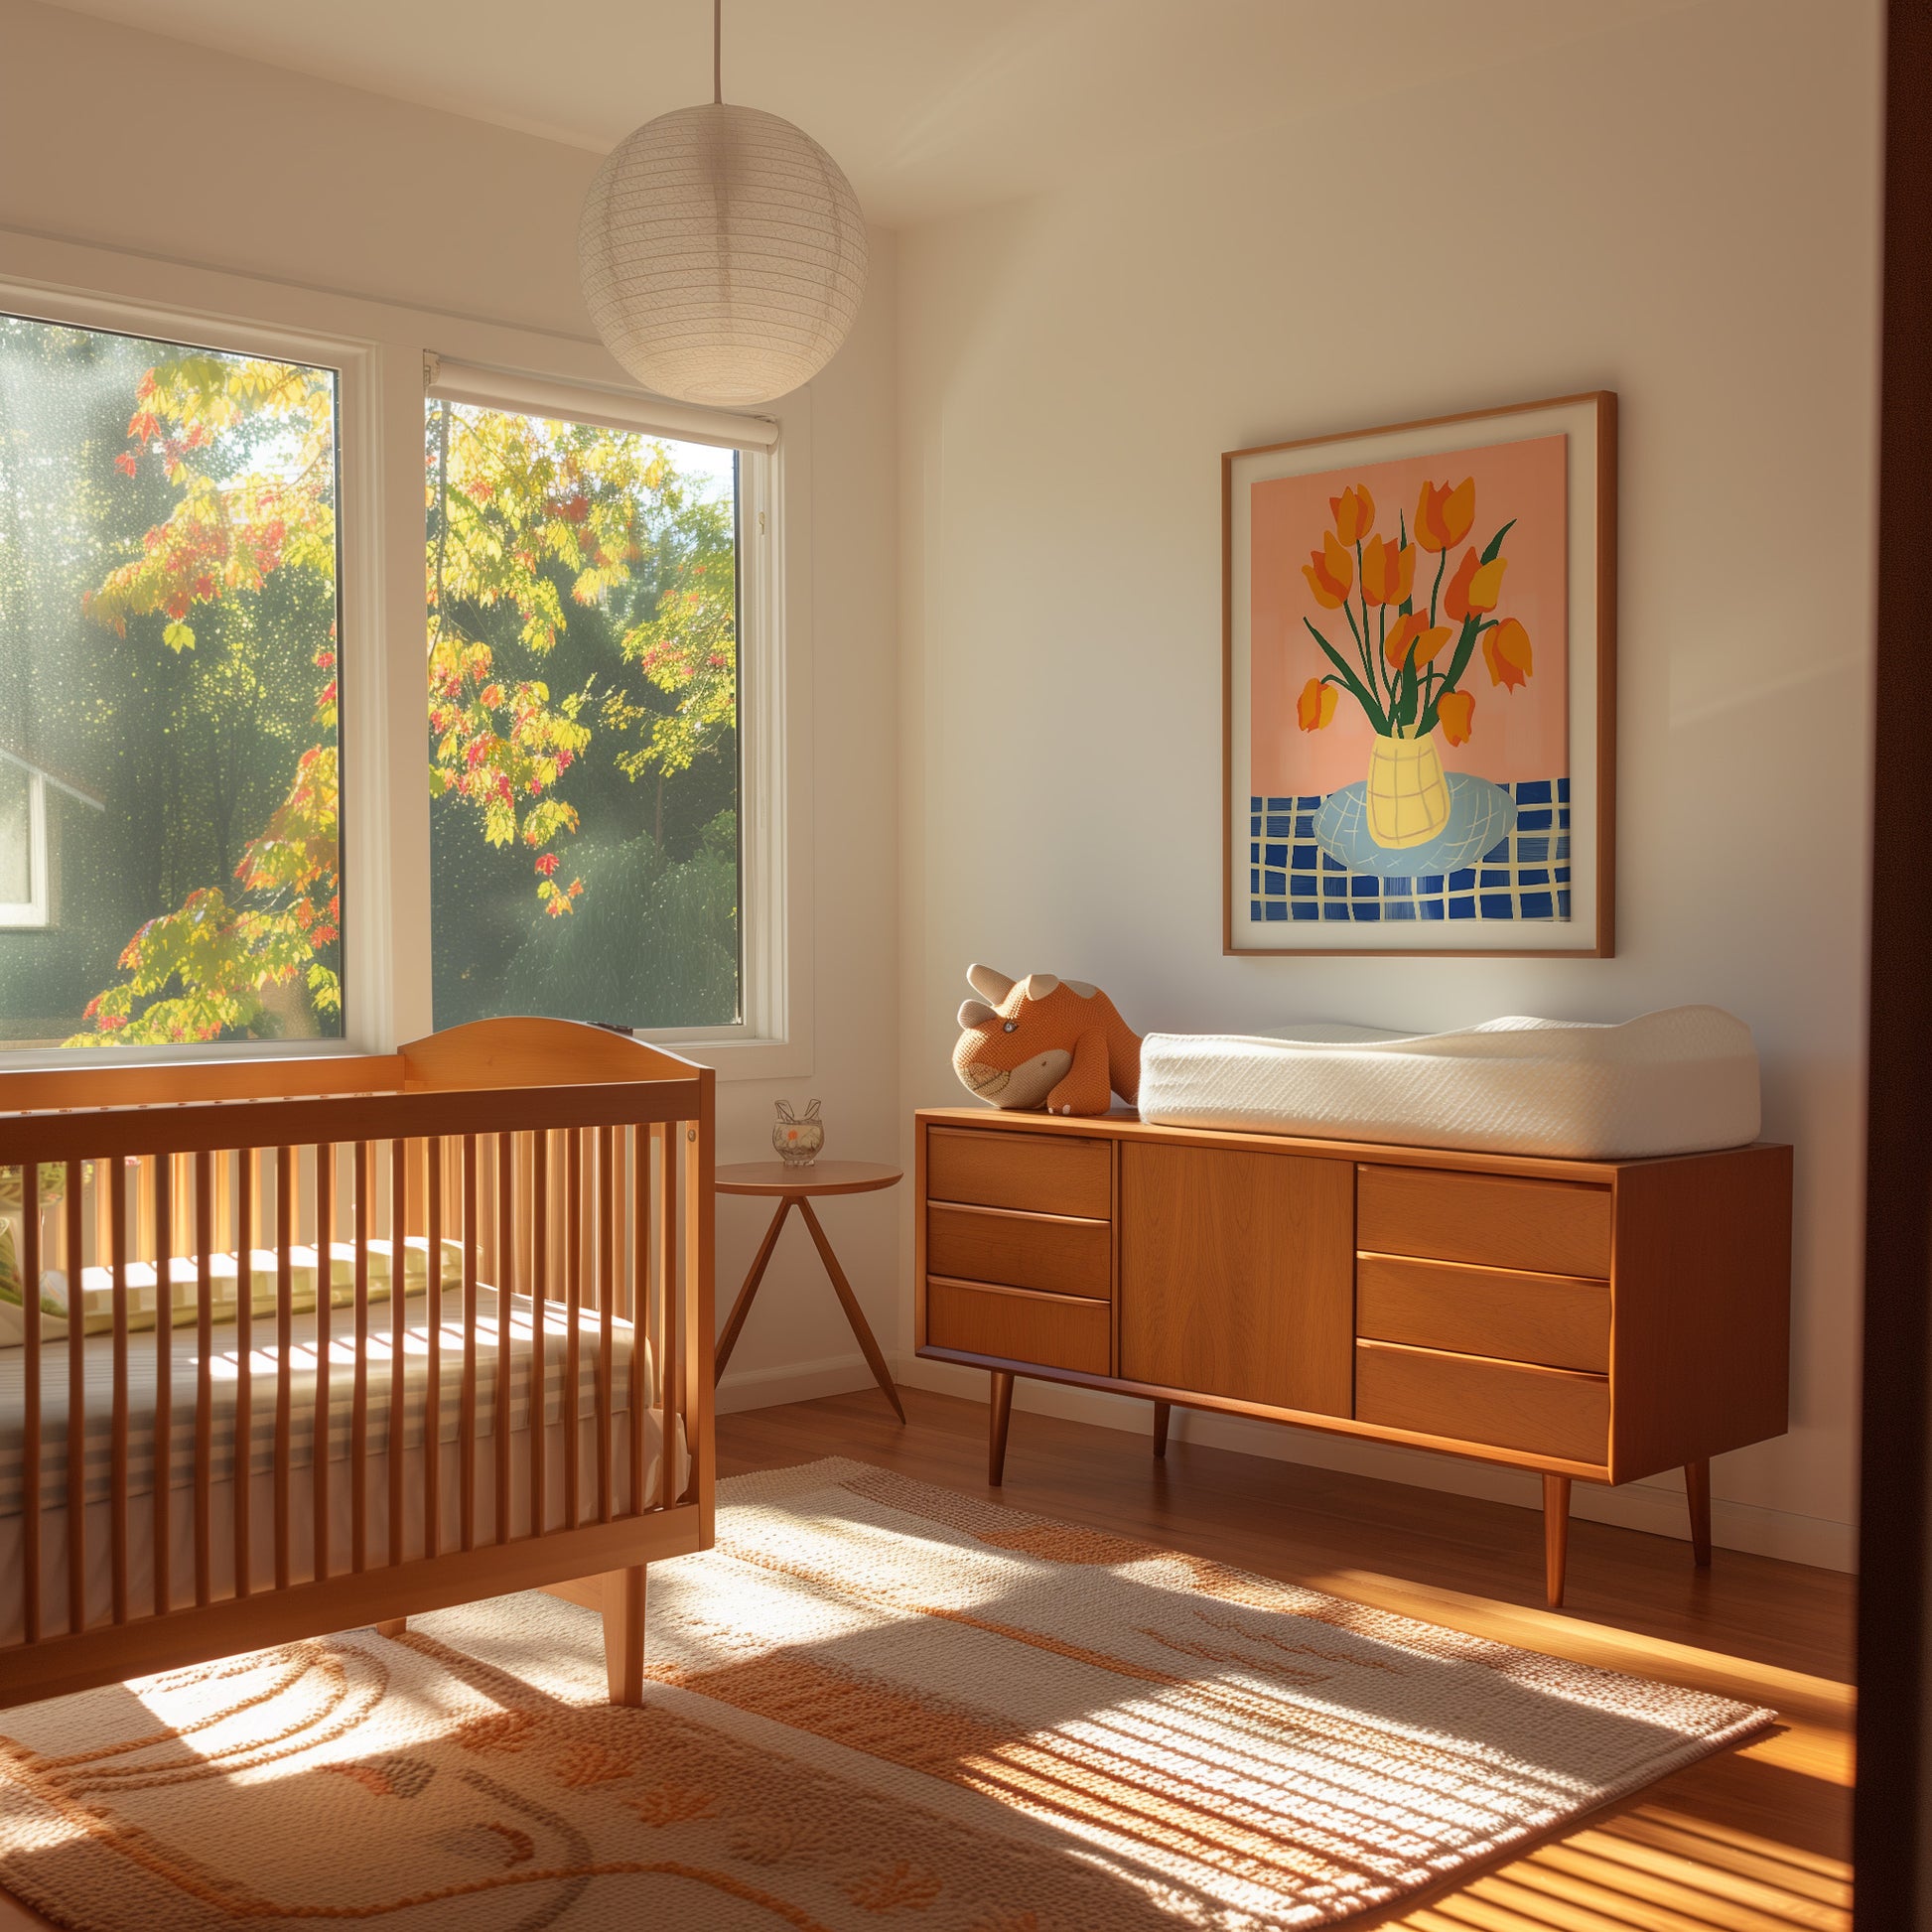 A cozy bedroom with wooden furniture, an orange rug, and a large window with autumn leaves outside.